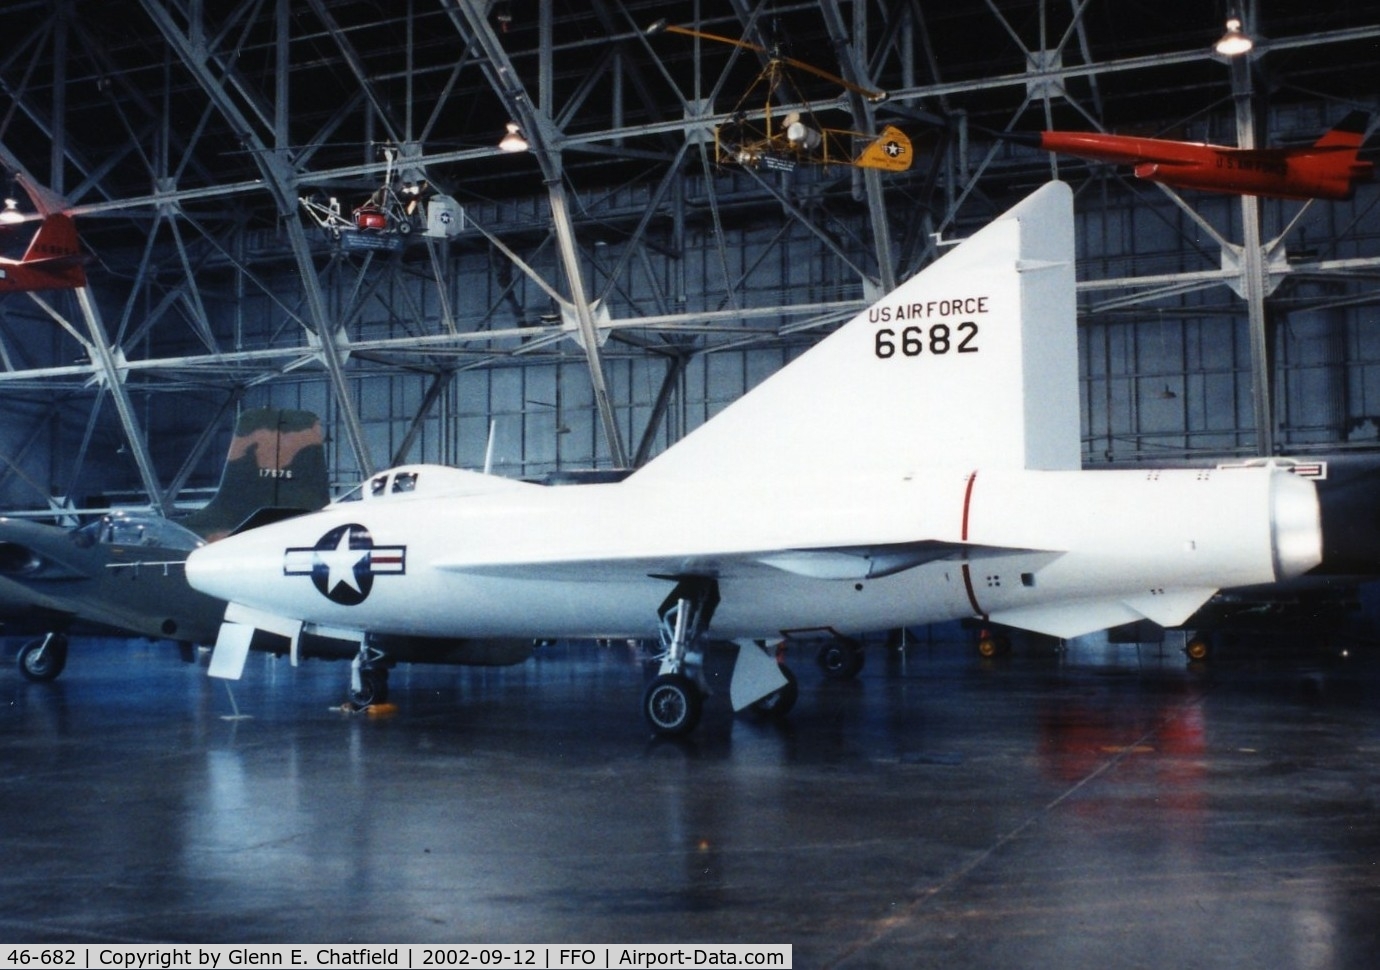 46-682, 1948 Convair XF-92A C/N 7-002, XF-92A at the National Museum of the U.S. Air Force